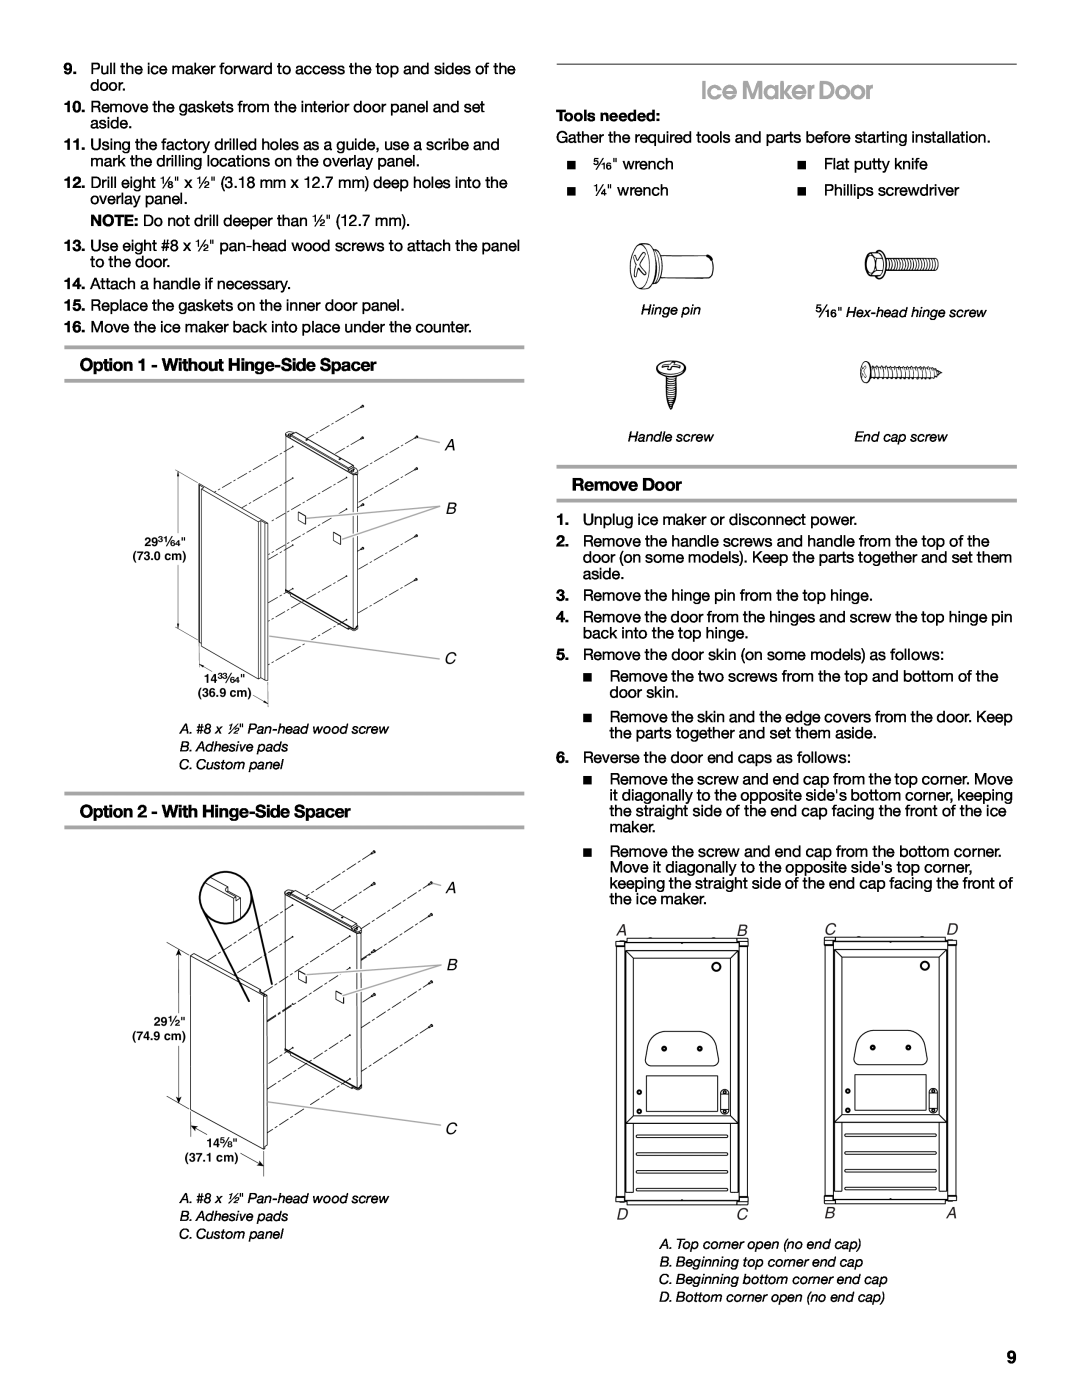 Jenn-Air W10282143B manual Ice Maker Door, Remove Door, Ab Cd Dc Ba, Option 1 - Without Hinge-Side Spacer 